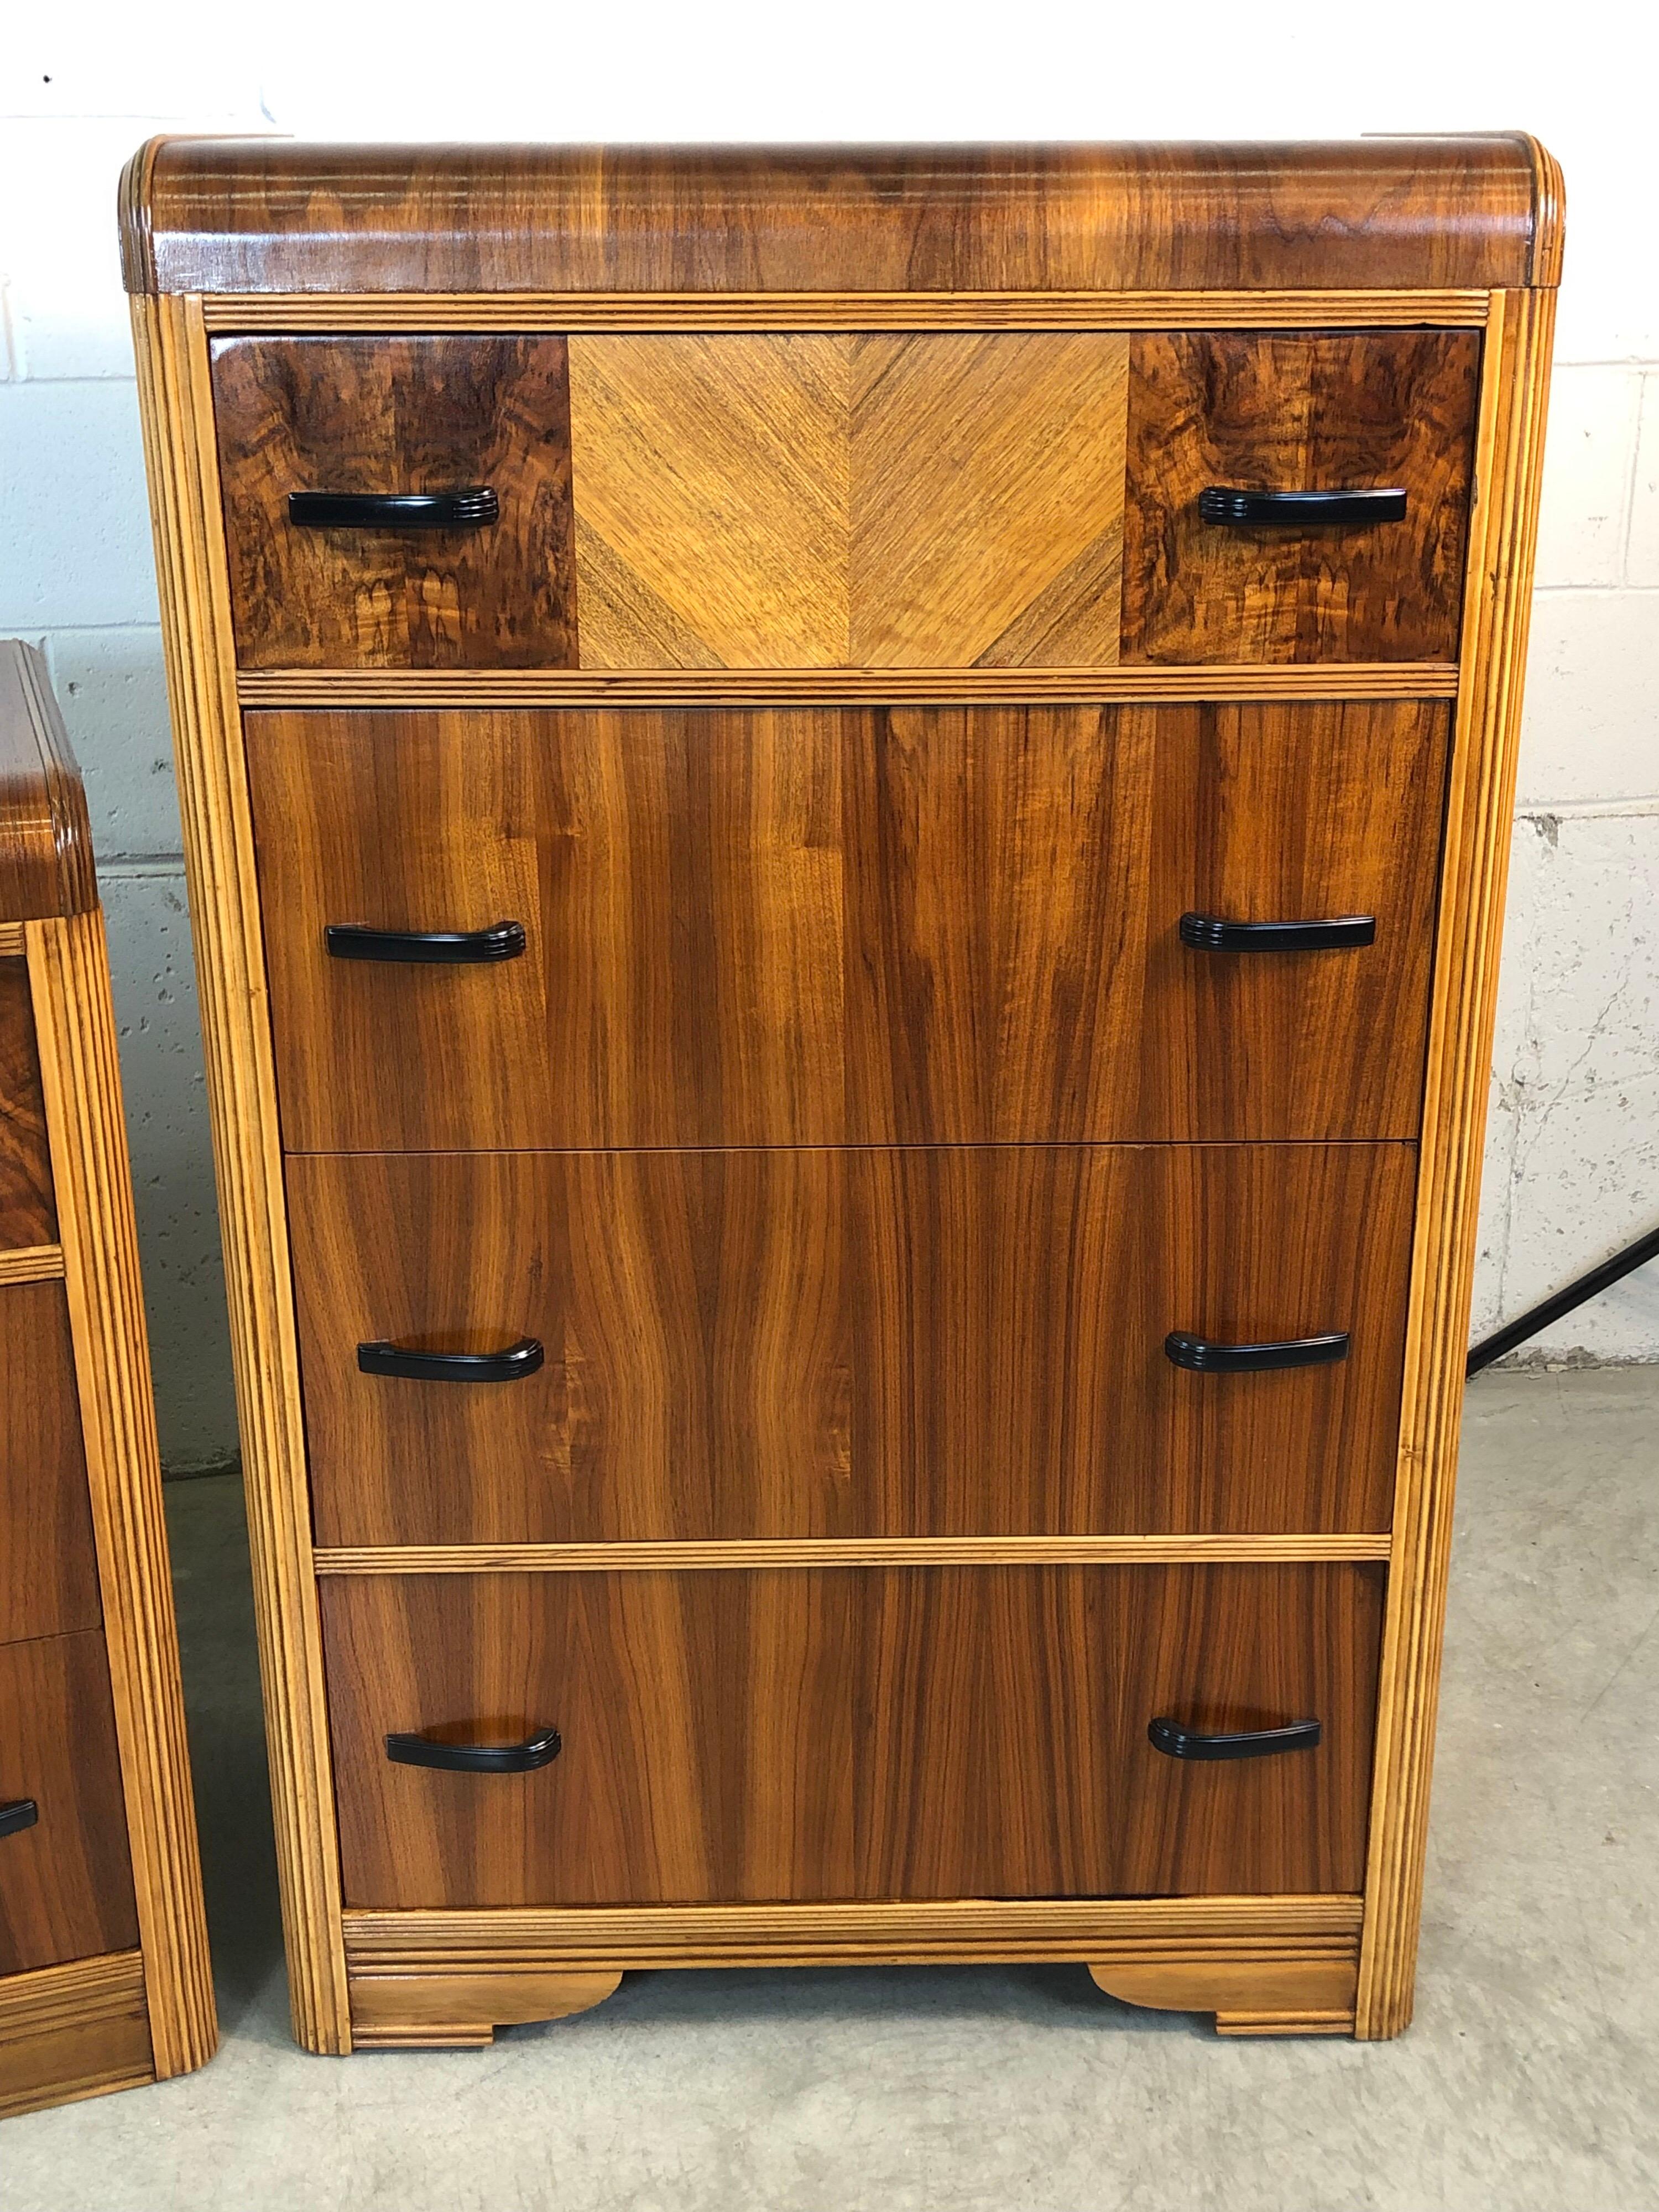 Vintage Art Deco pair of waterfall dressers. One is a tall boy and the other is a lowboy. They are a matching pair with a mix of walnut, mahogany and maple woods. The tall dresser has four deep drawers and the low dresser has three deep drawers.